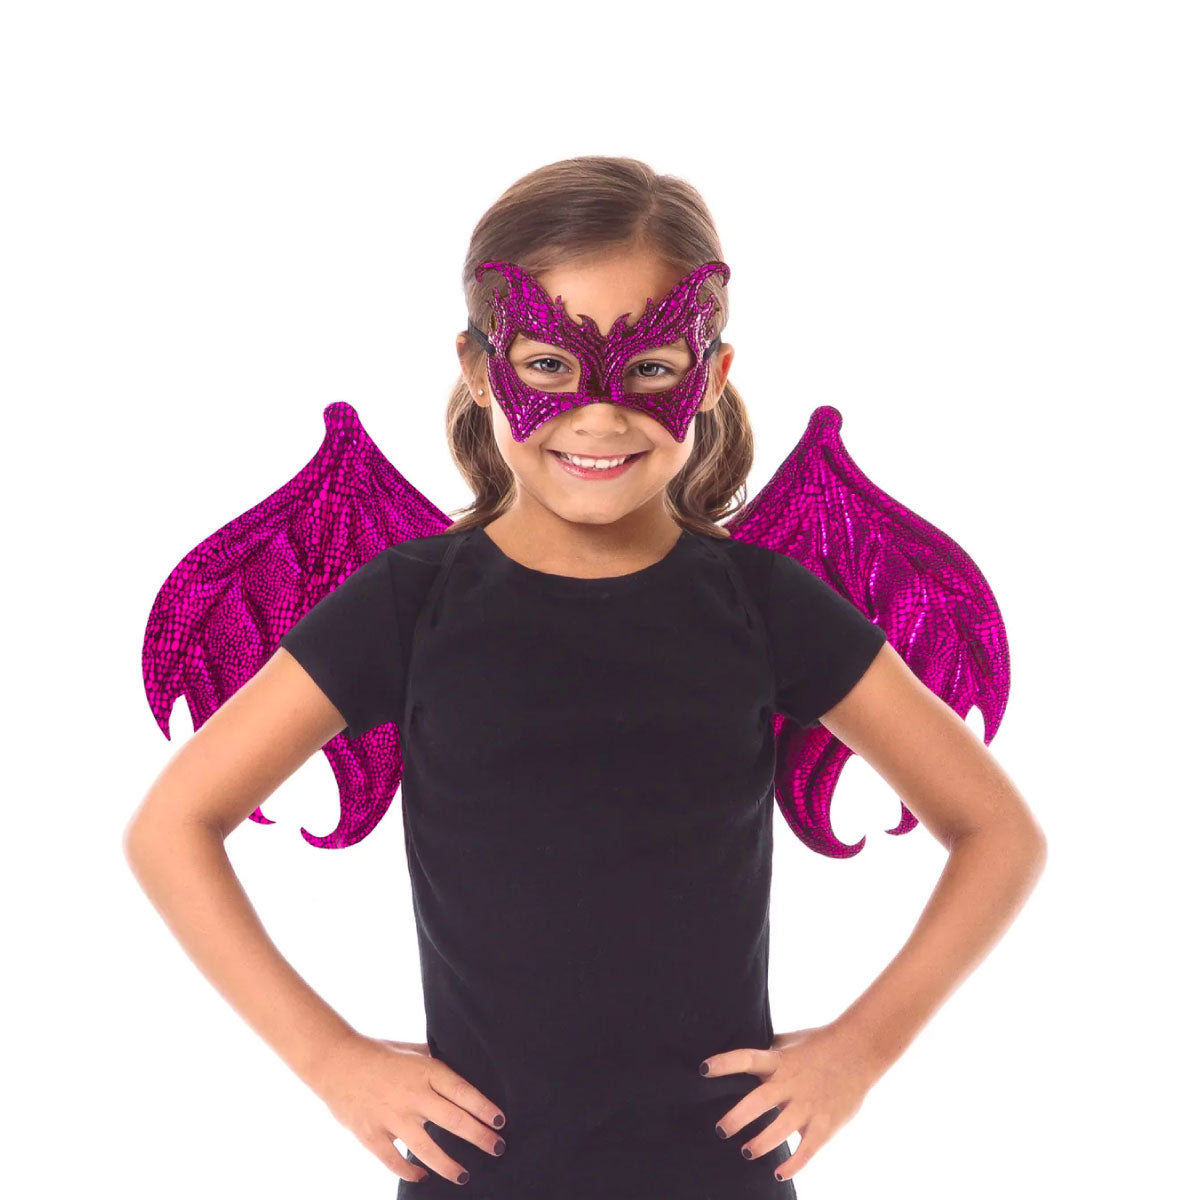 Magenta/Black Dragon Wings and Mask Set from Little Adventures